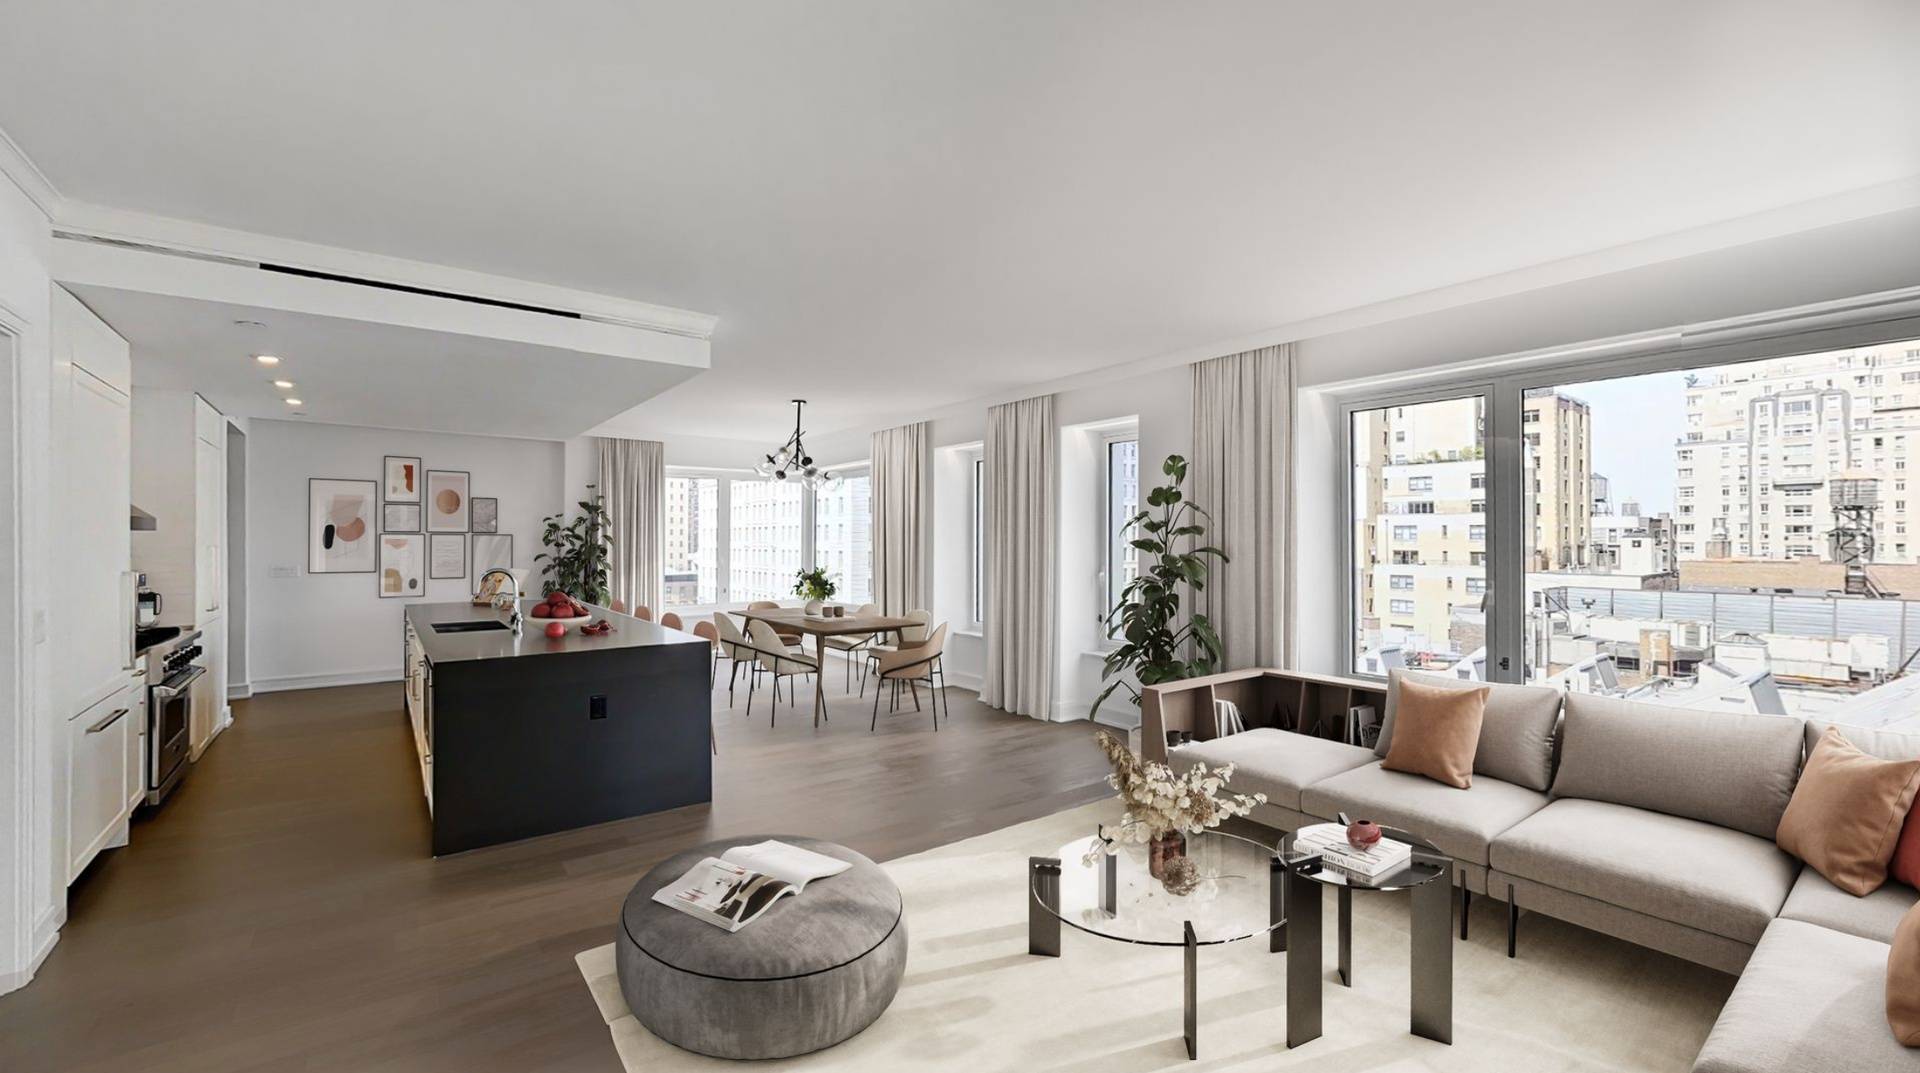 NoFee Boutique New Uber Luxury 3BR/3Bths White Glove Amenities Gym, Roofdeck in the Heart of the  Upper West Side